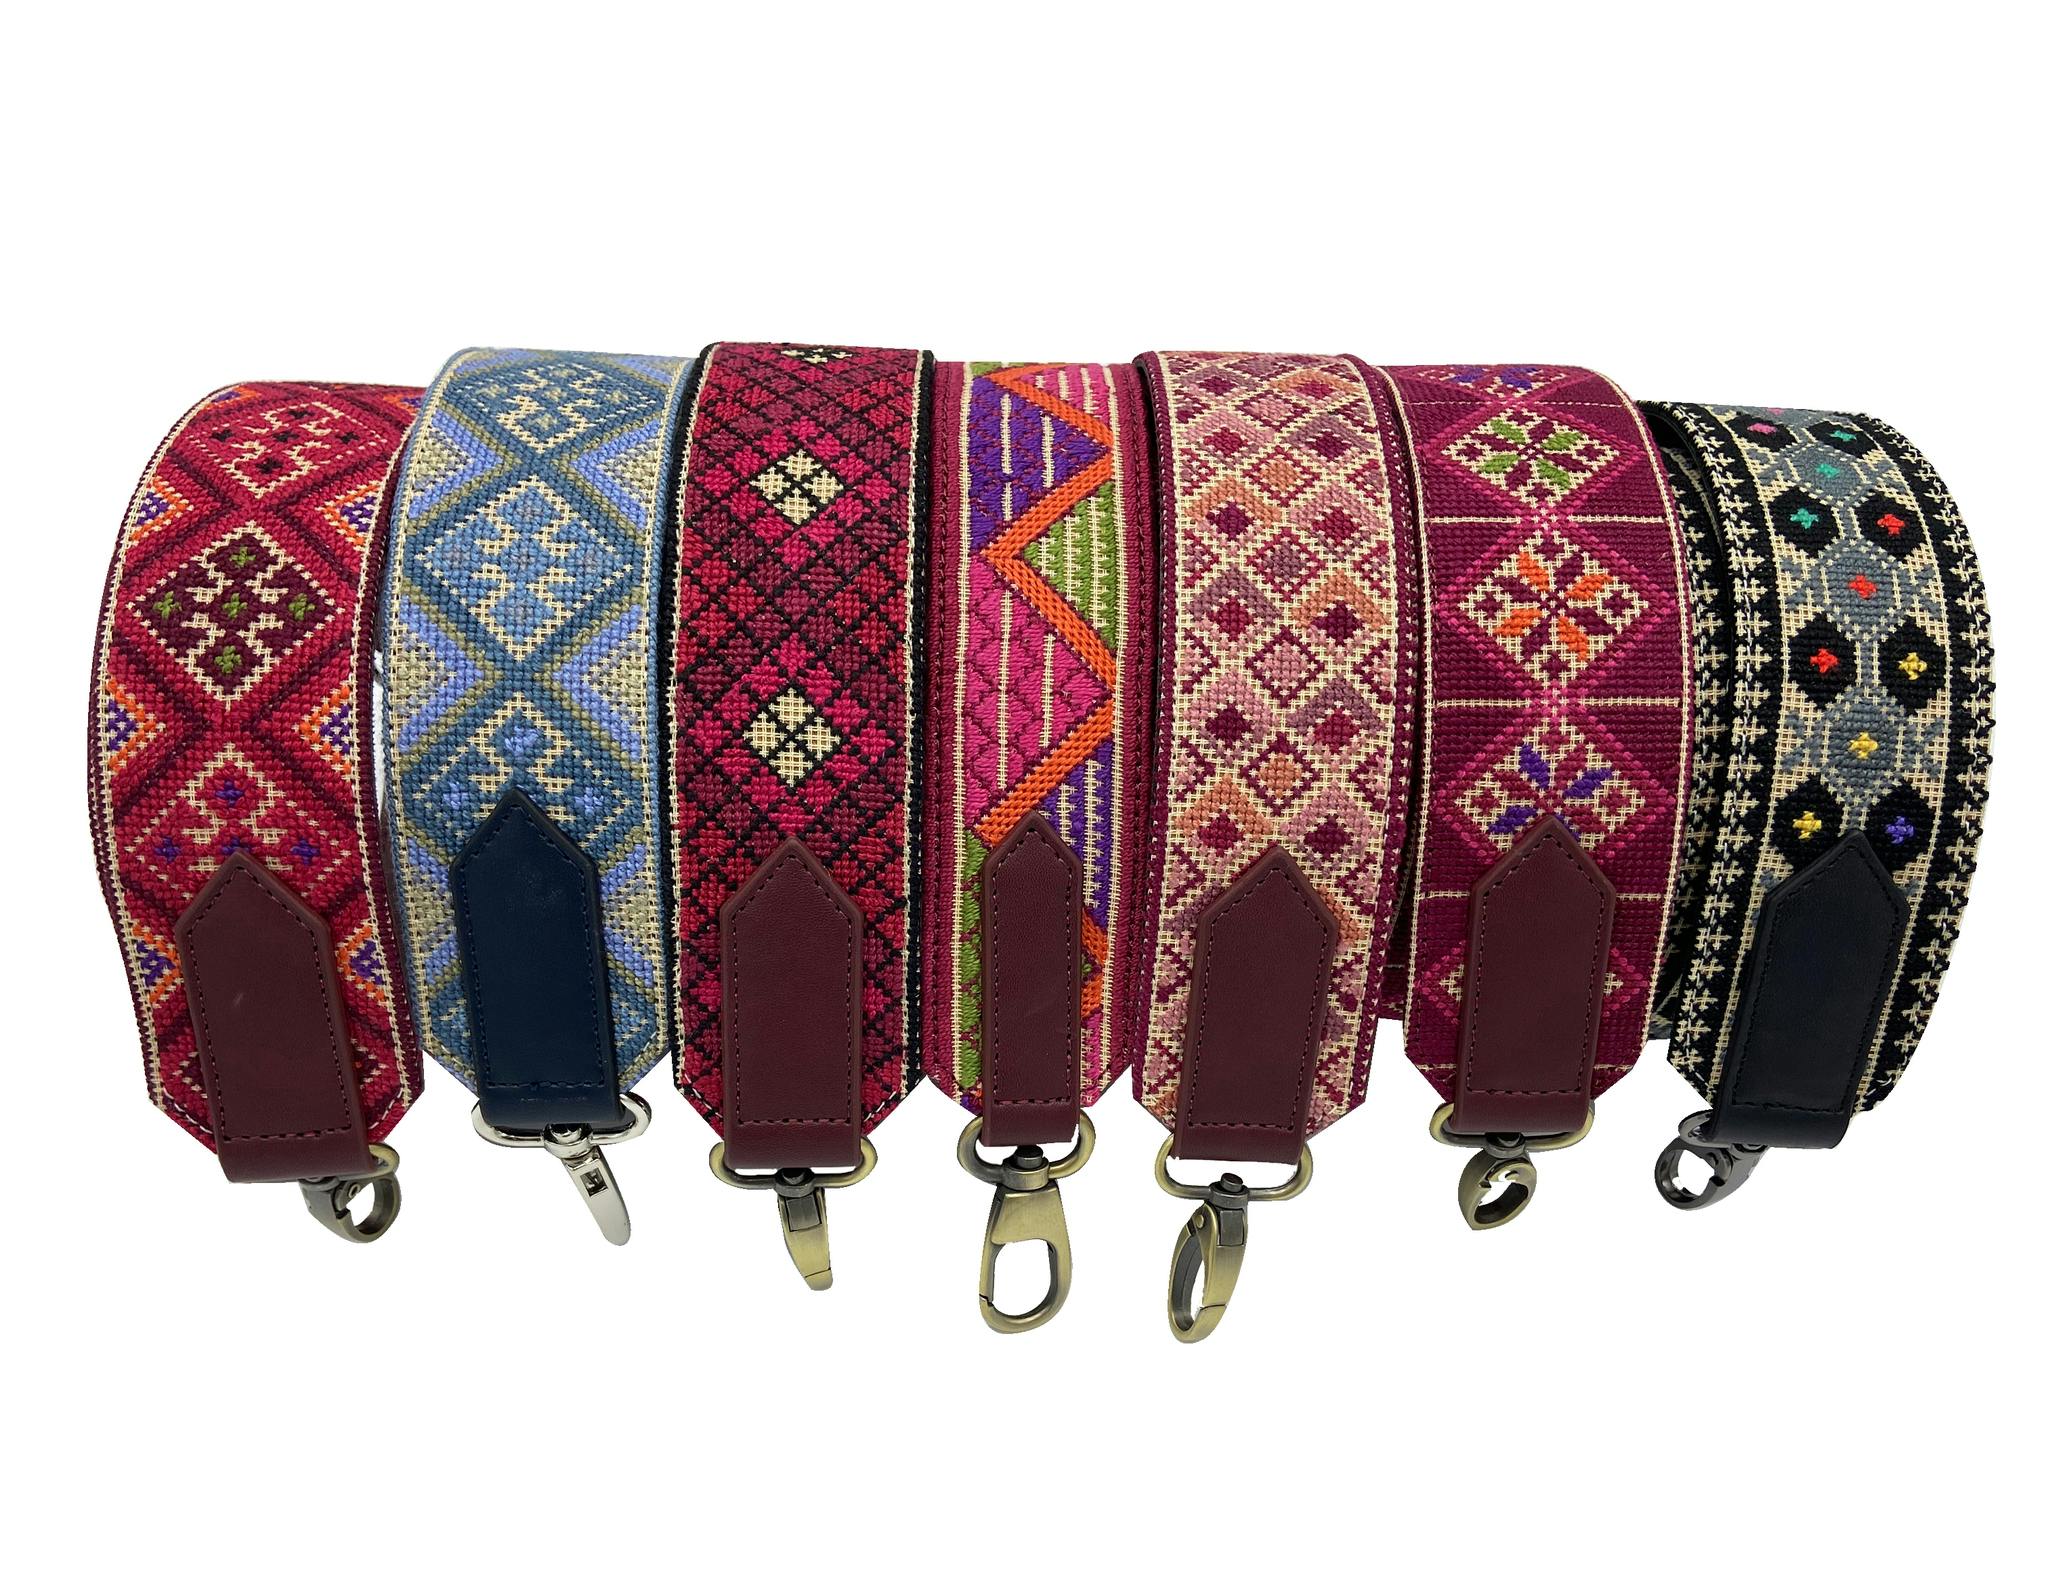 This vintage design, hand embroidered camera strap & bag strap is made with love by refugee women in Lebanon. Made for you to carry your heritage with pride.